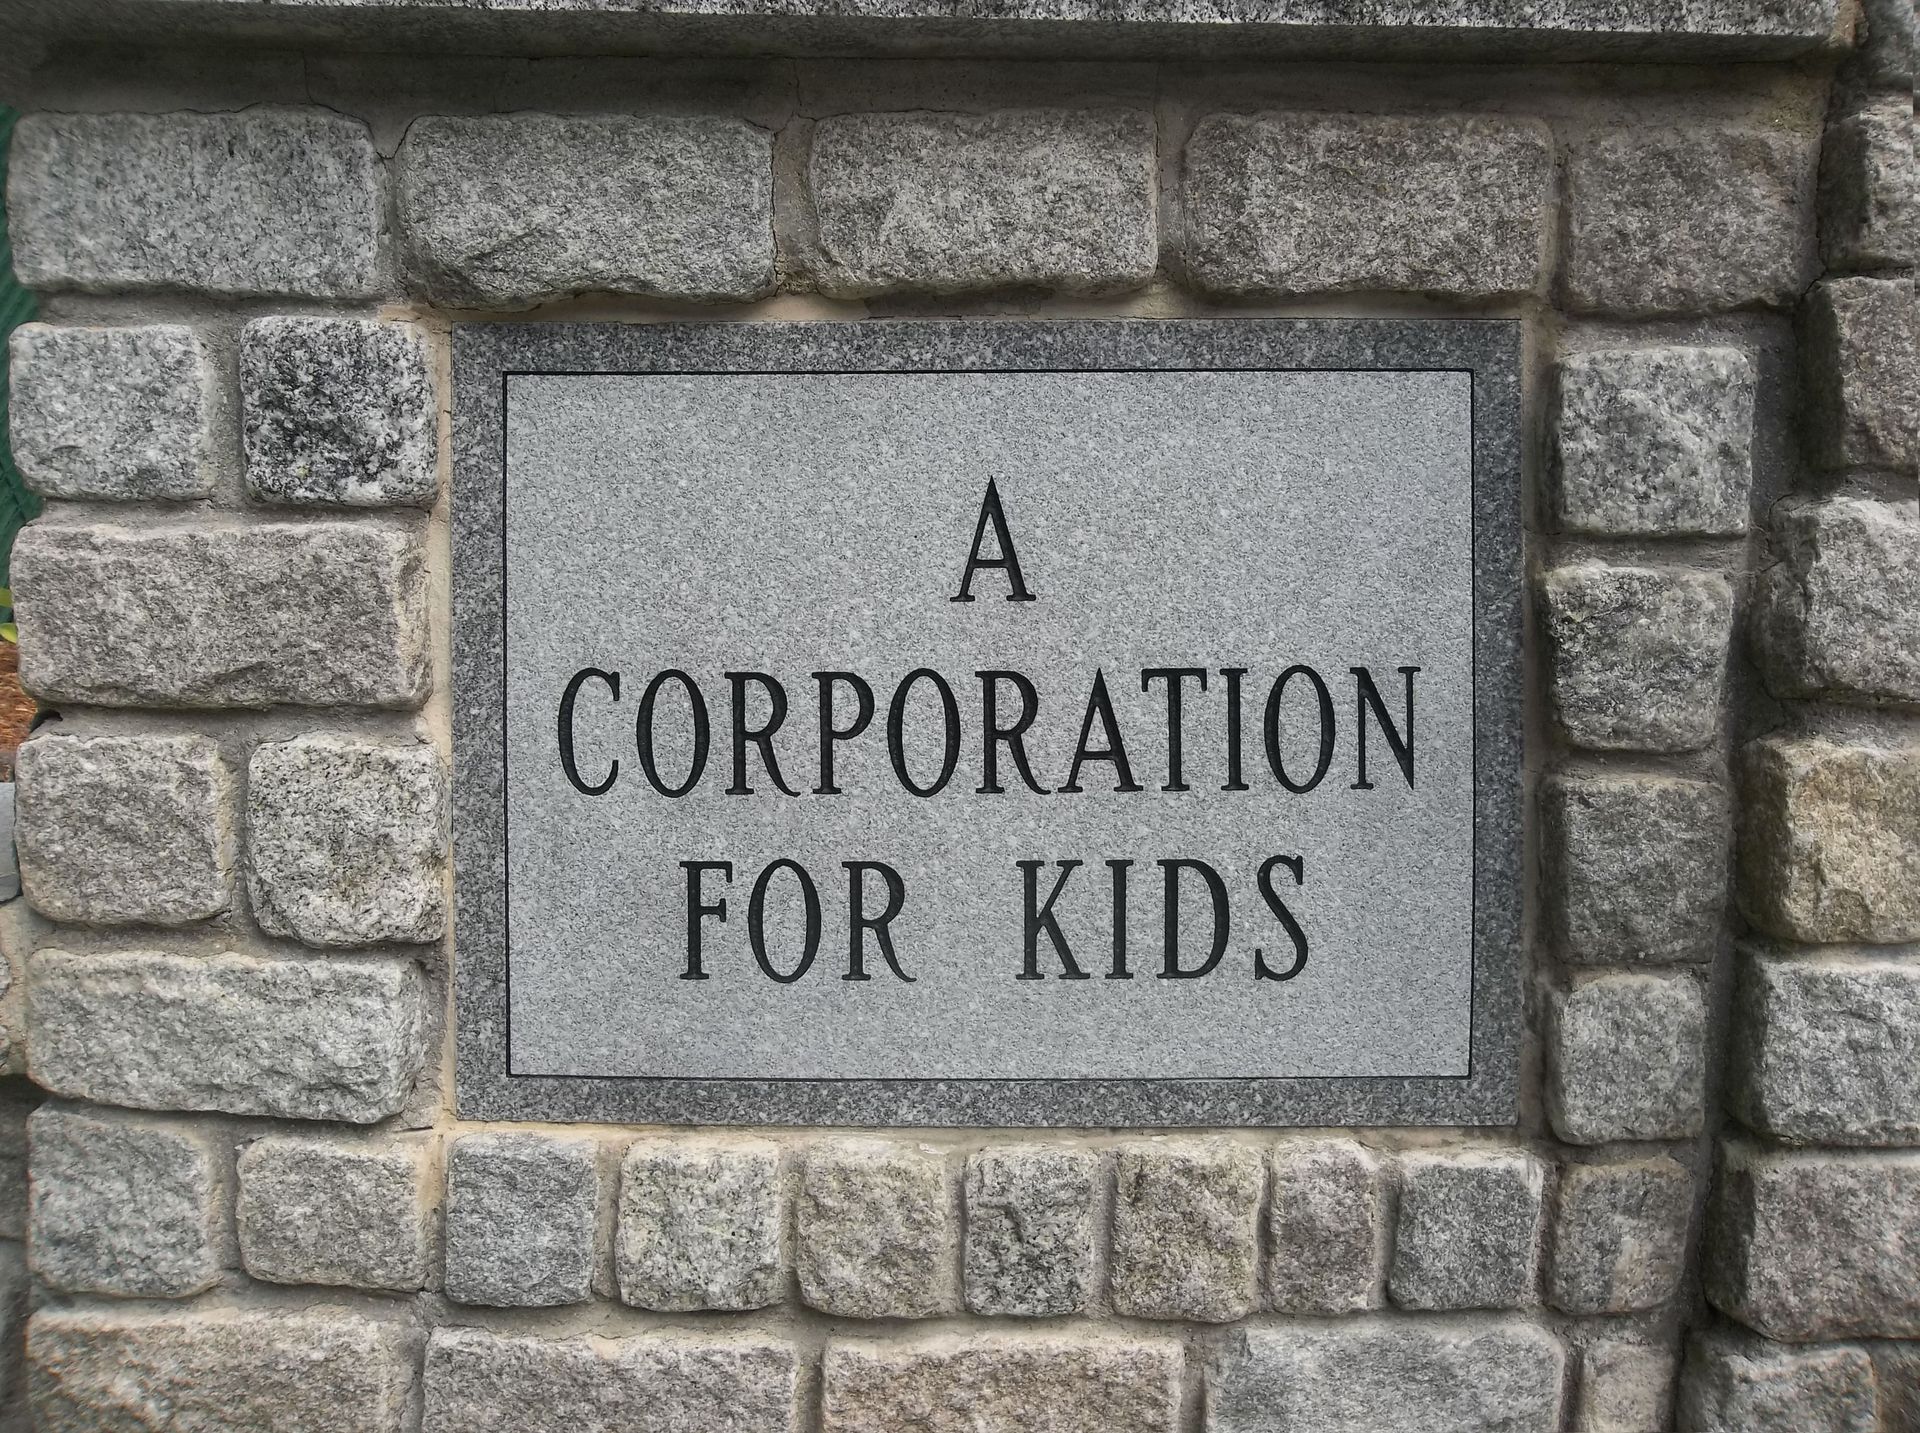 A sign on a brick wall that says a corporation for kids